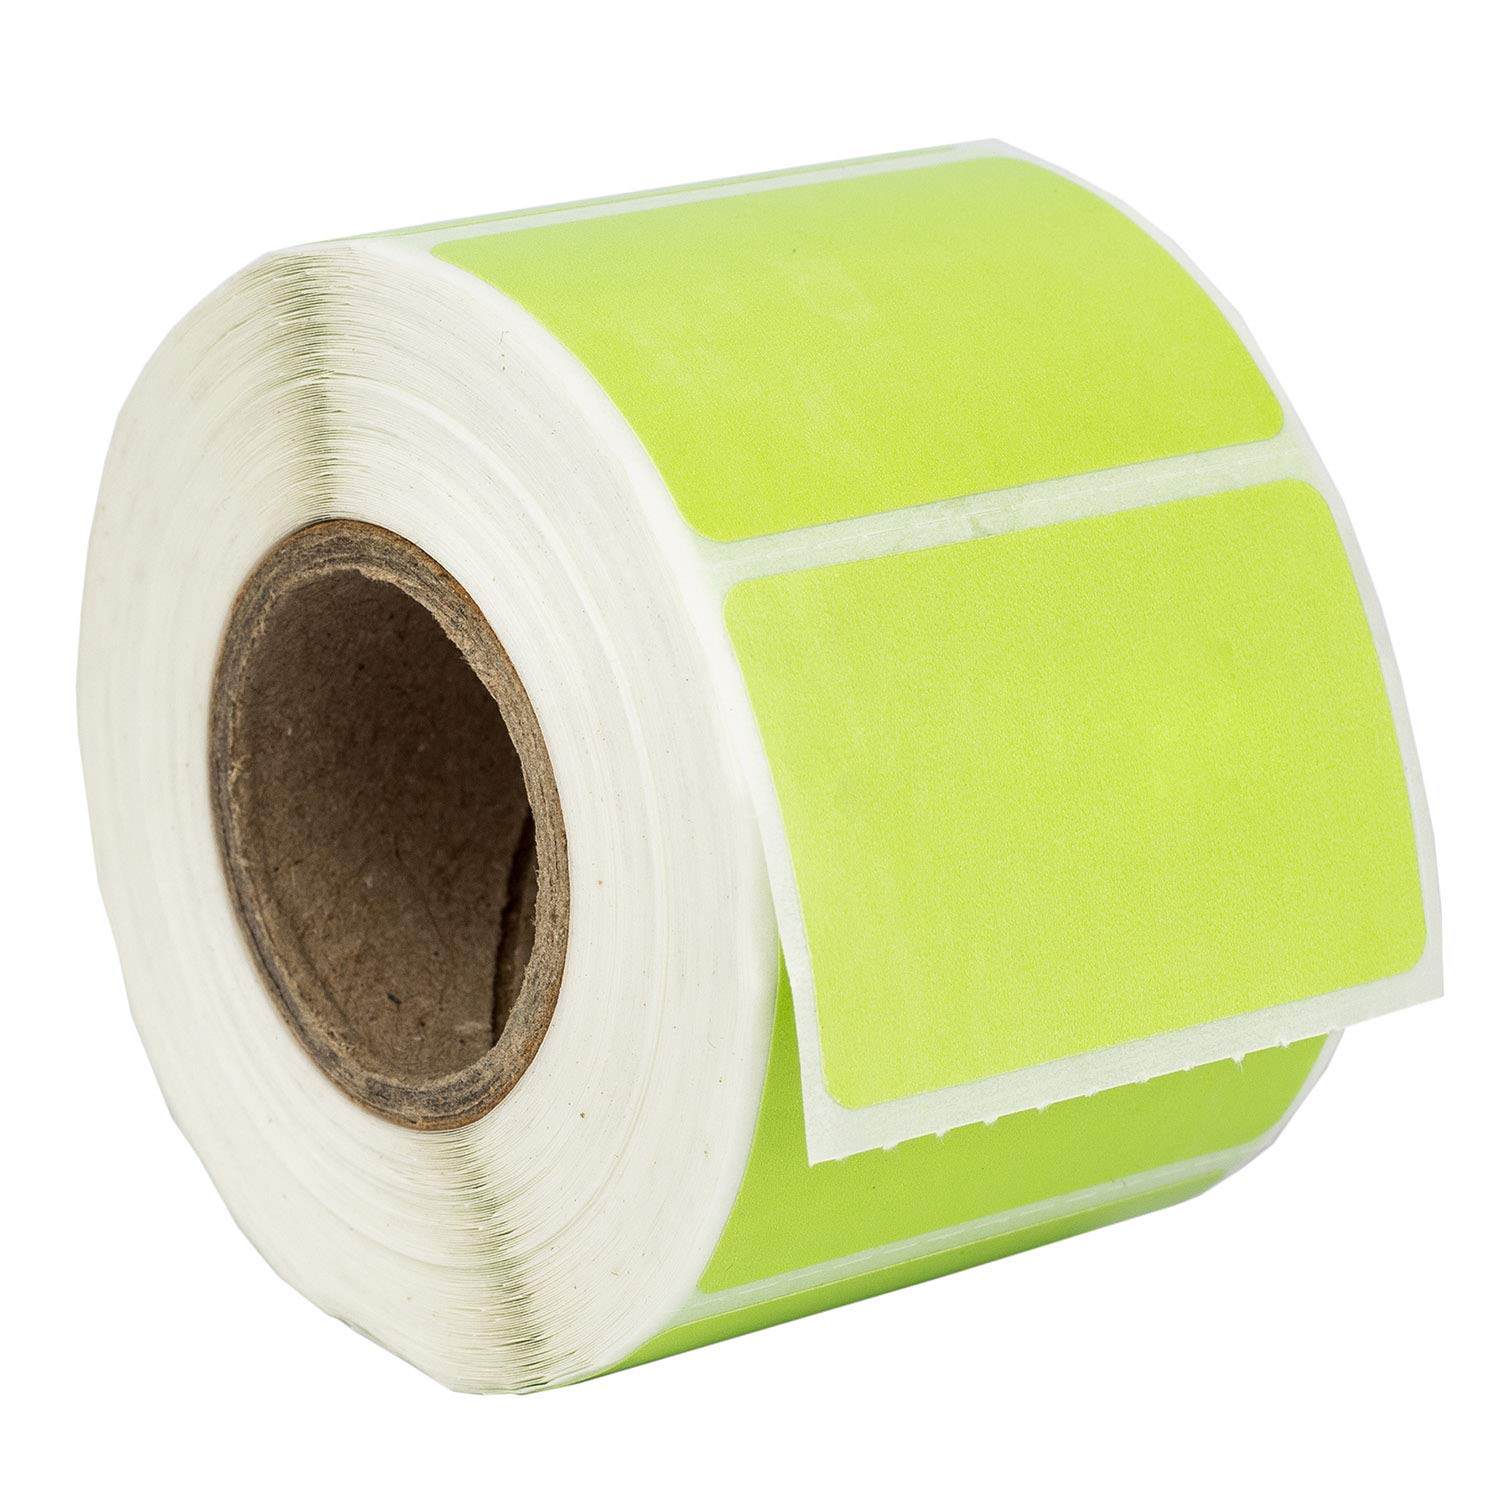 HOUSELABELS 1.5" x 1" Green Multipurpose Labels on 1" Core Compatible with Zebra and Rollo Printers, 1 Roll / 520 Labels per Roll